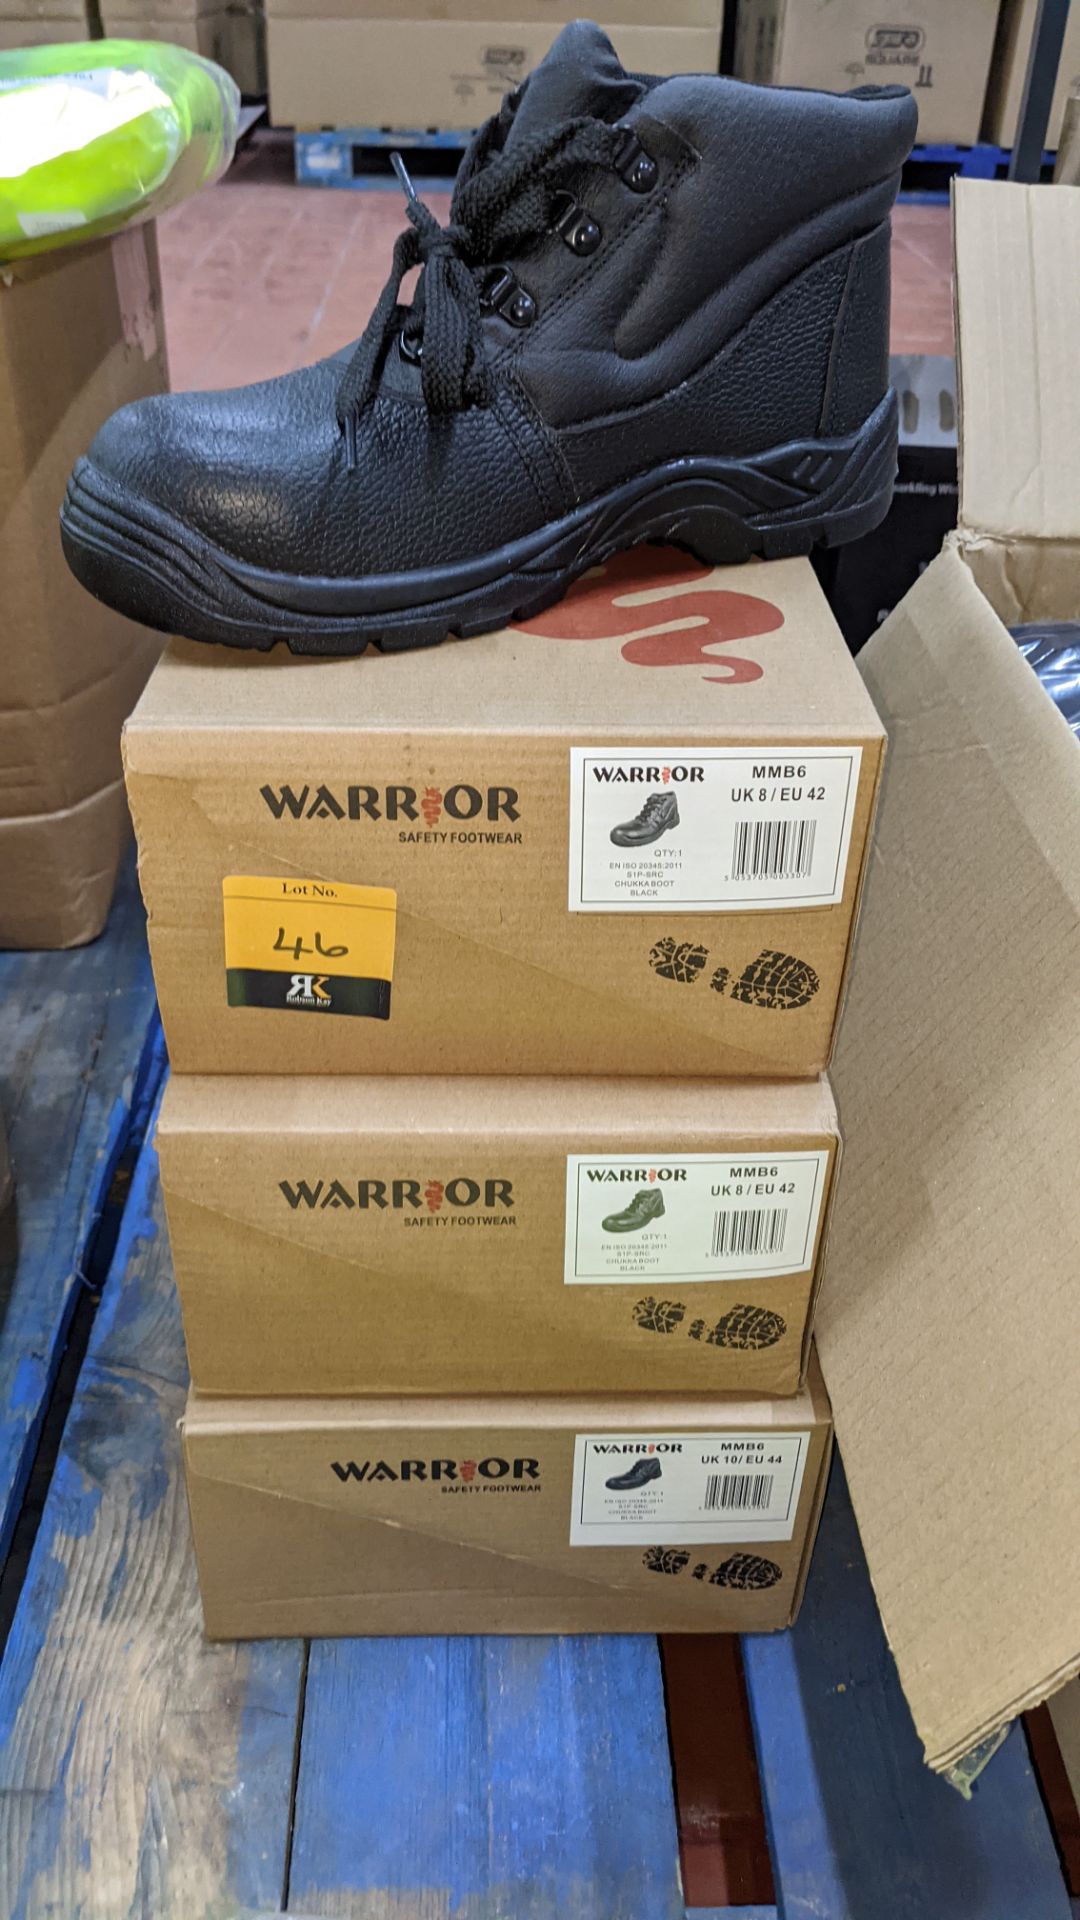 3 pairs of Warrior Chukka black work boots with protective toes, sizes UK8 & UK10 - Image 2 of 4